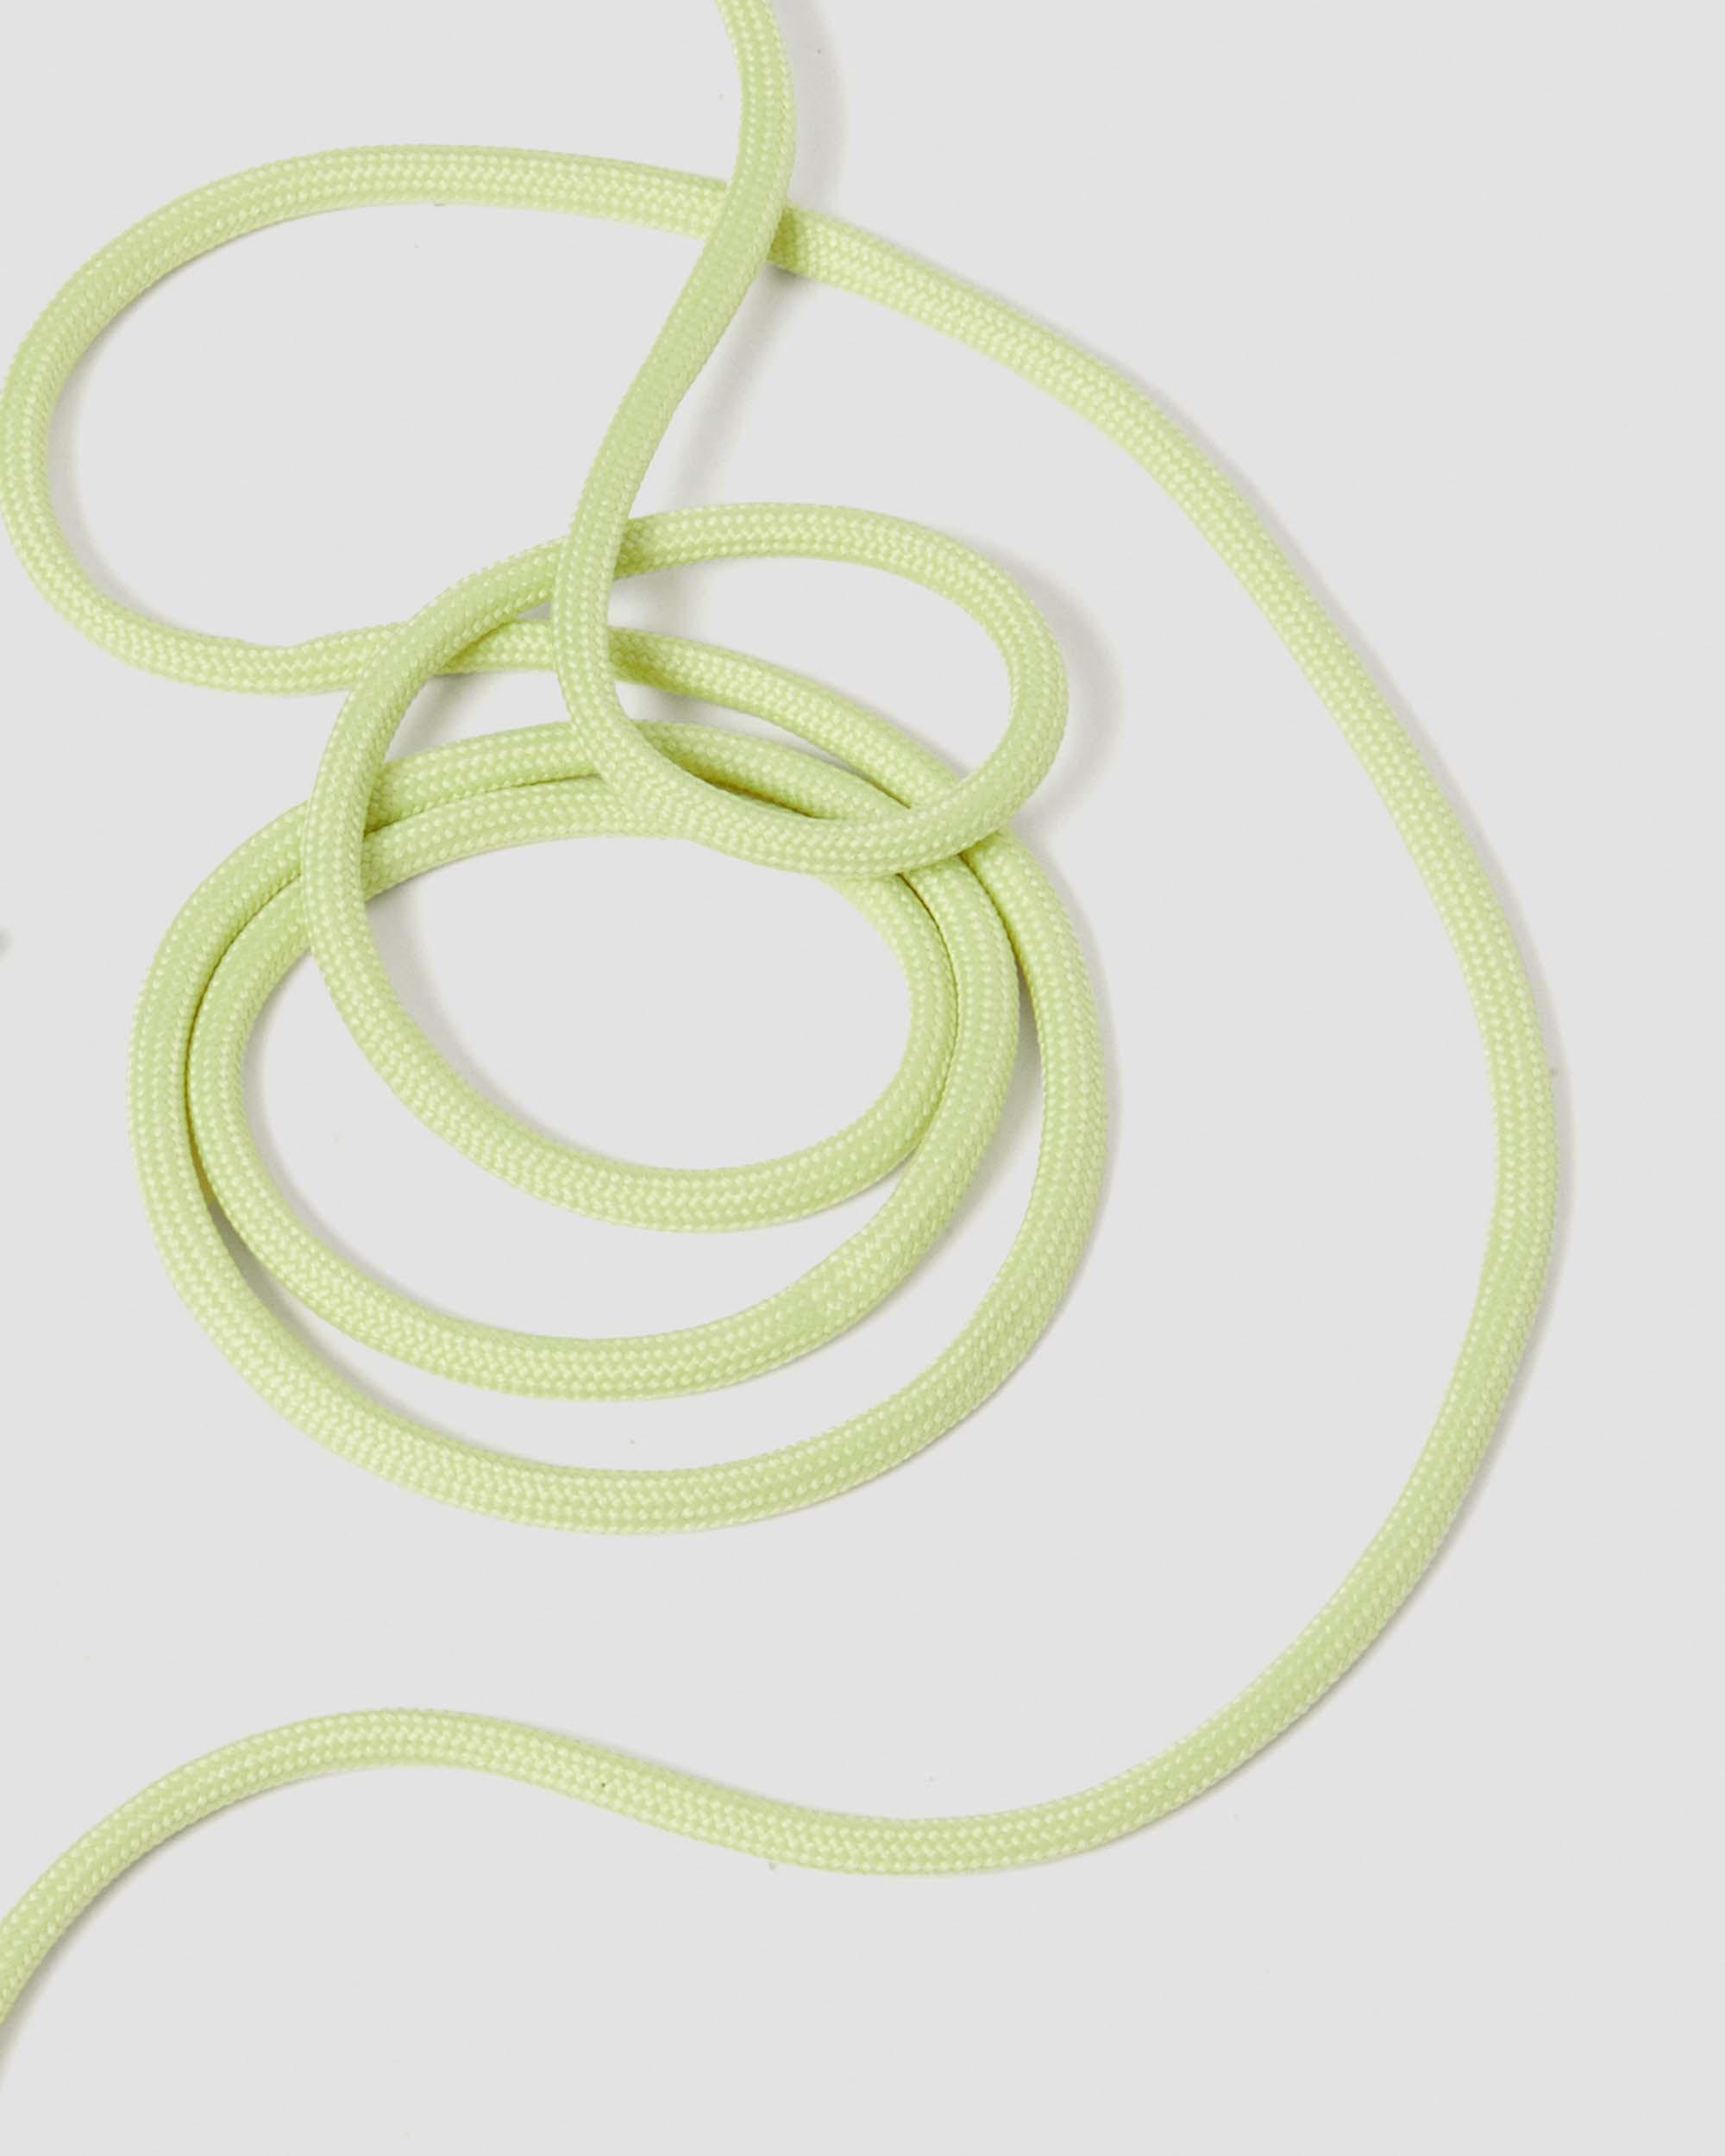 55 Inch Round Shoe Laces (8-10 Eye) in Lime Green